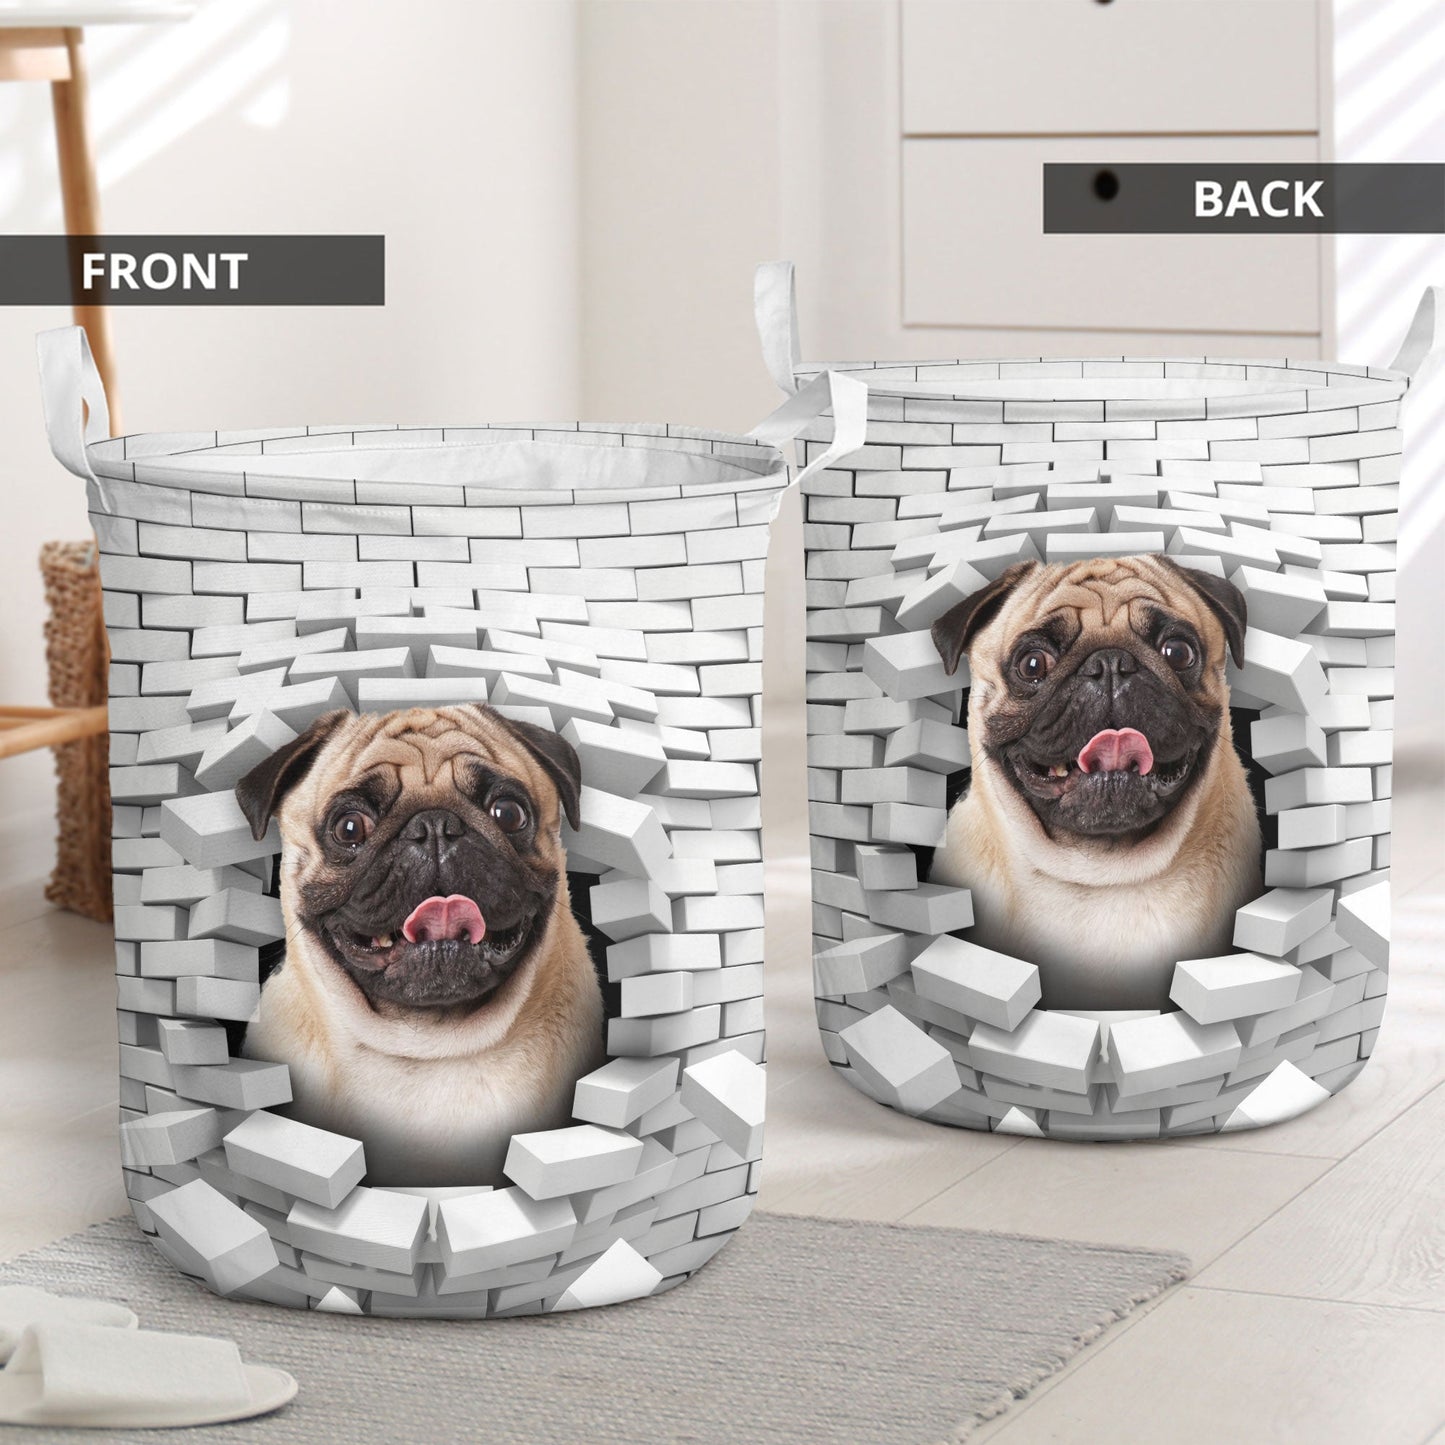 Pug - In The Hole Of Wall Pattern Laundry Basket